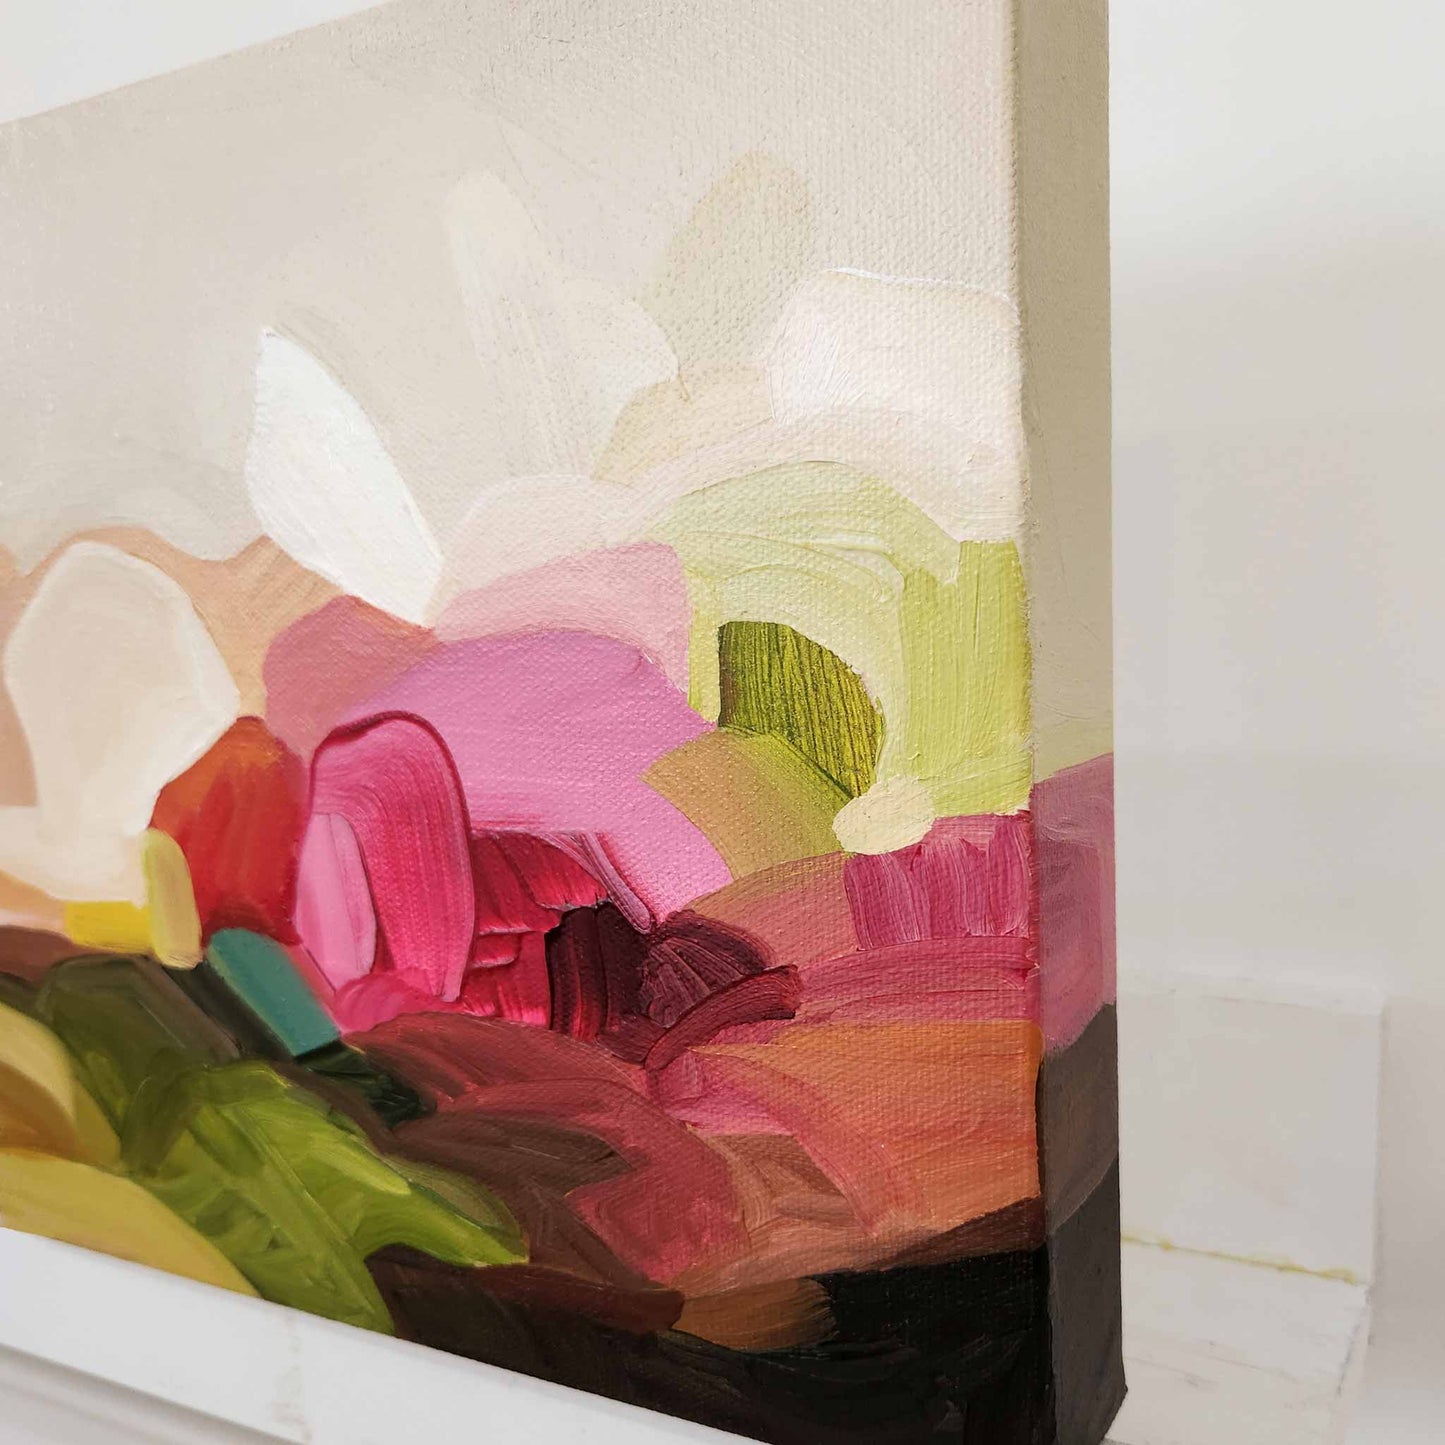 side view of small abstract painting on canvas in bright pink cream and green